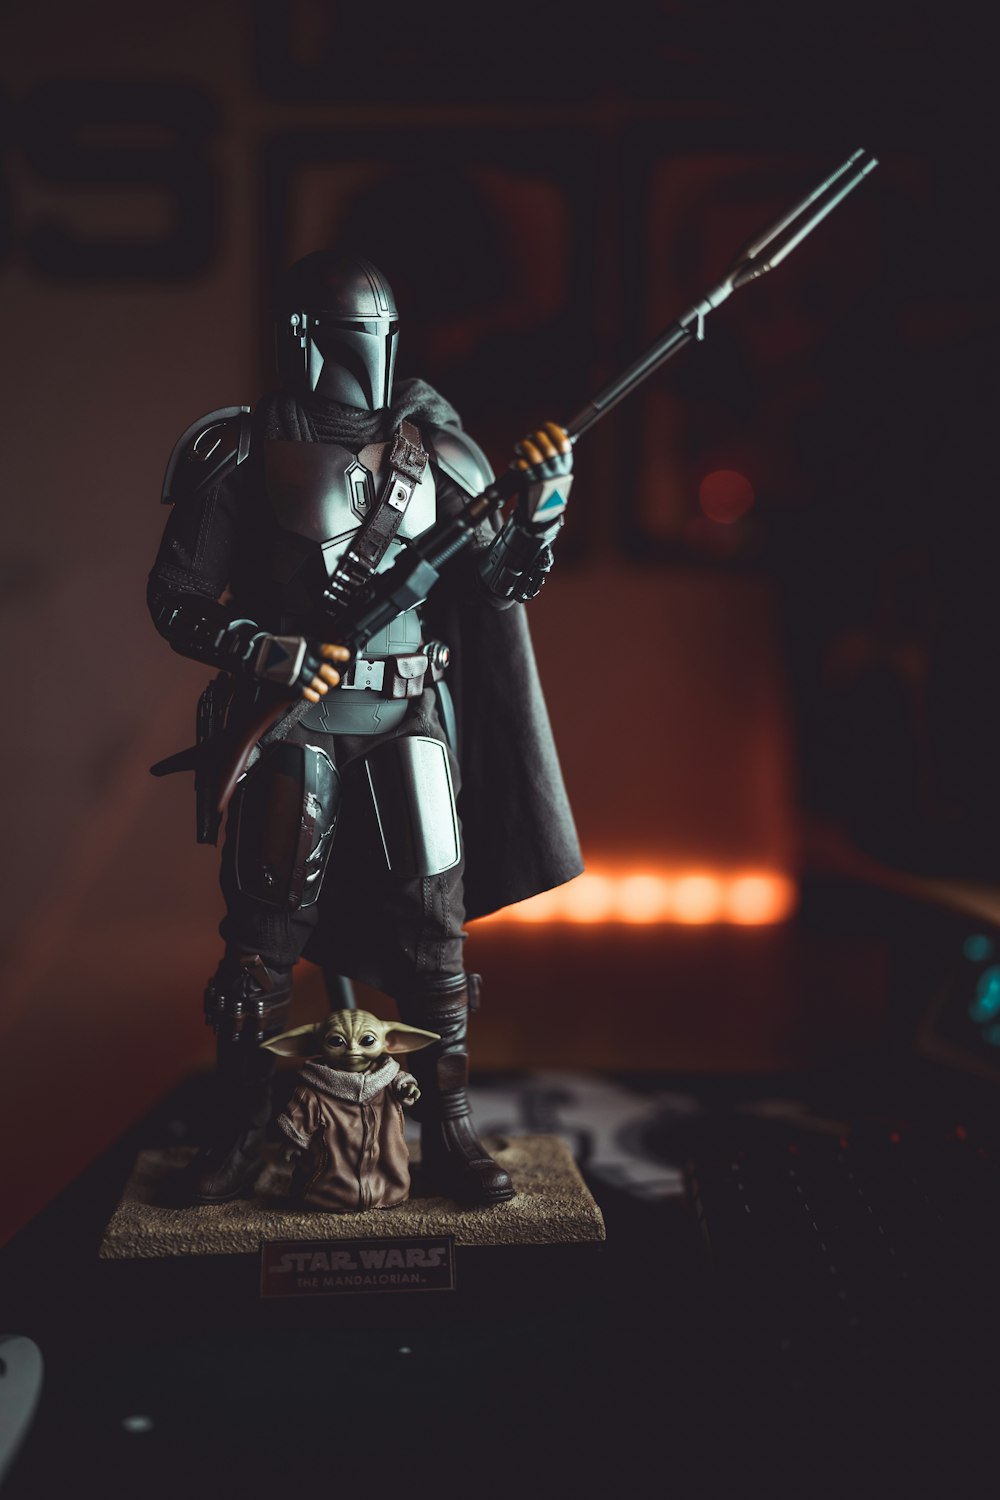 a star wars figurine is posed on a table